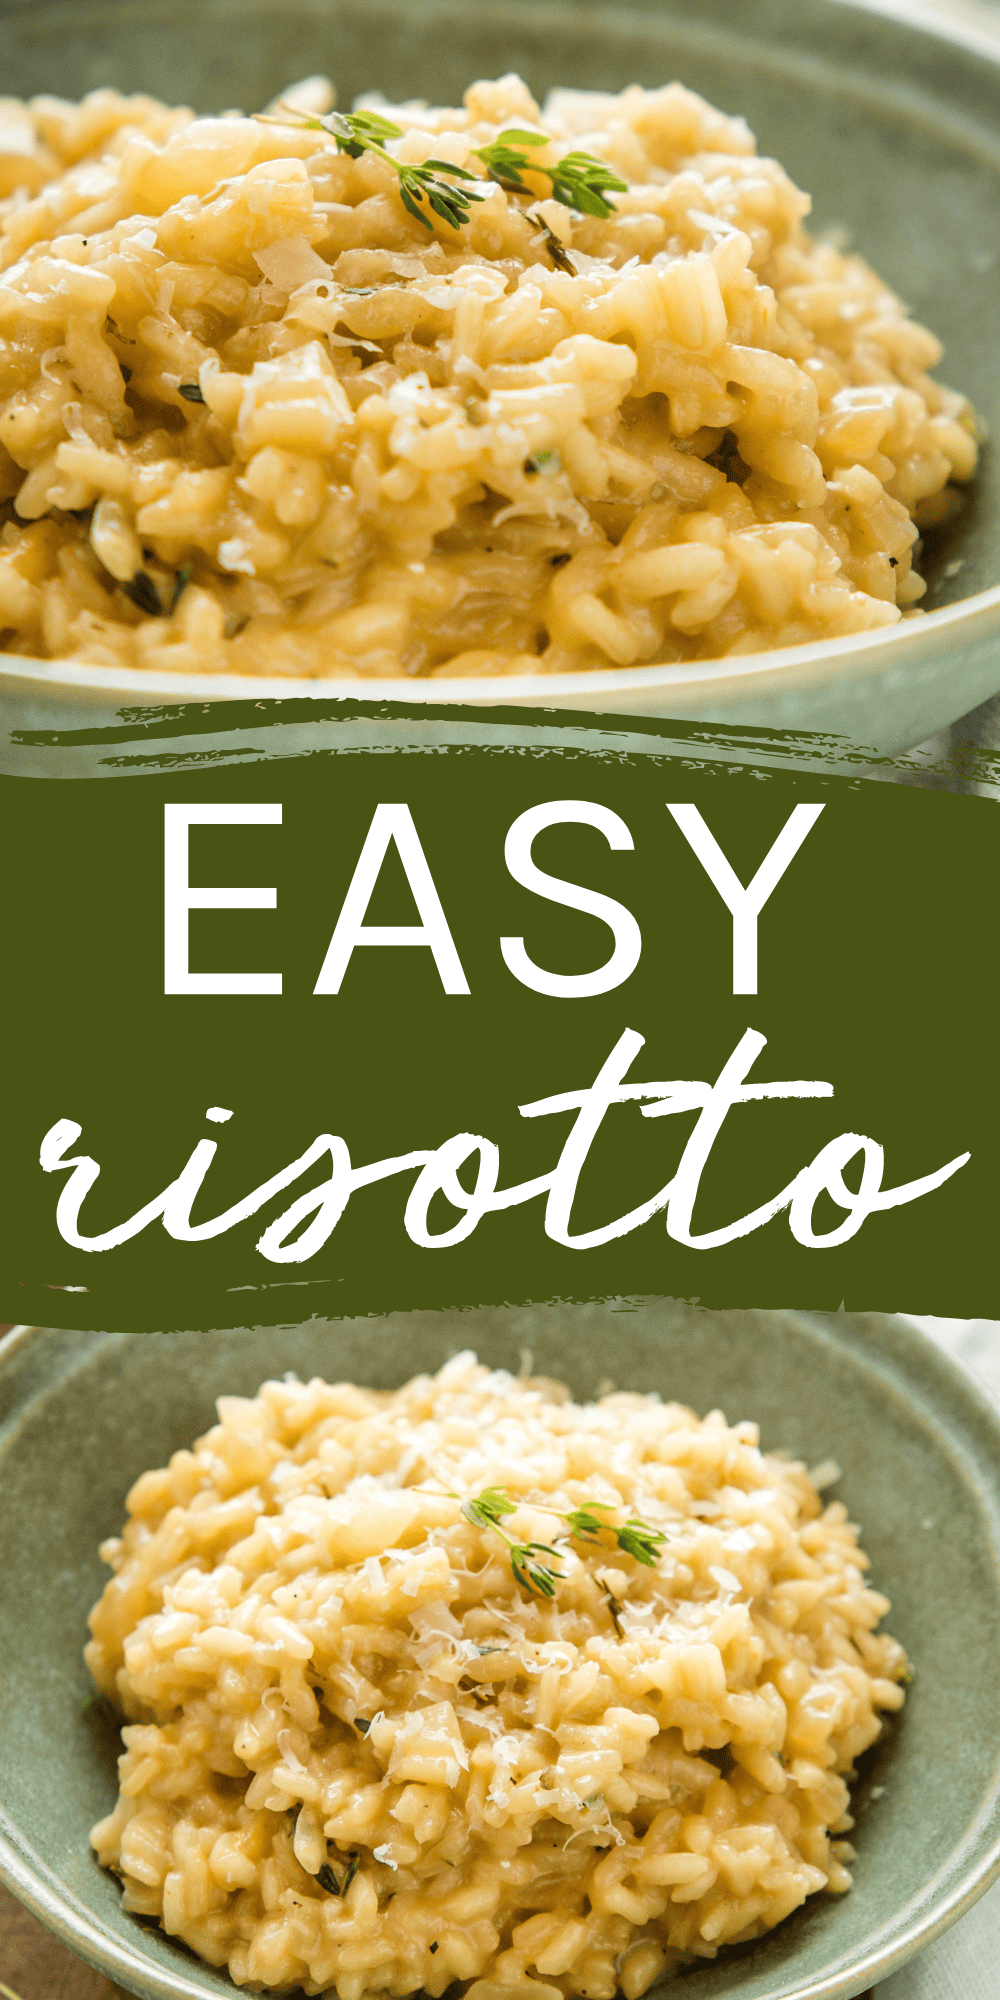 This Easy Risotto recipe is the best simple risotto that's easy to make in 20 minutes or less! The perfect restaurant-quality side dish that's easy enough for a busy weeknight! Recipe from thebusybaker.ca! #easyrisotto #risotto #risottorecipe #risottotips #howtomakerisotto #homemaderisotto via @busybakerblog